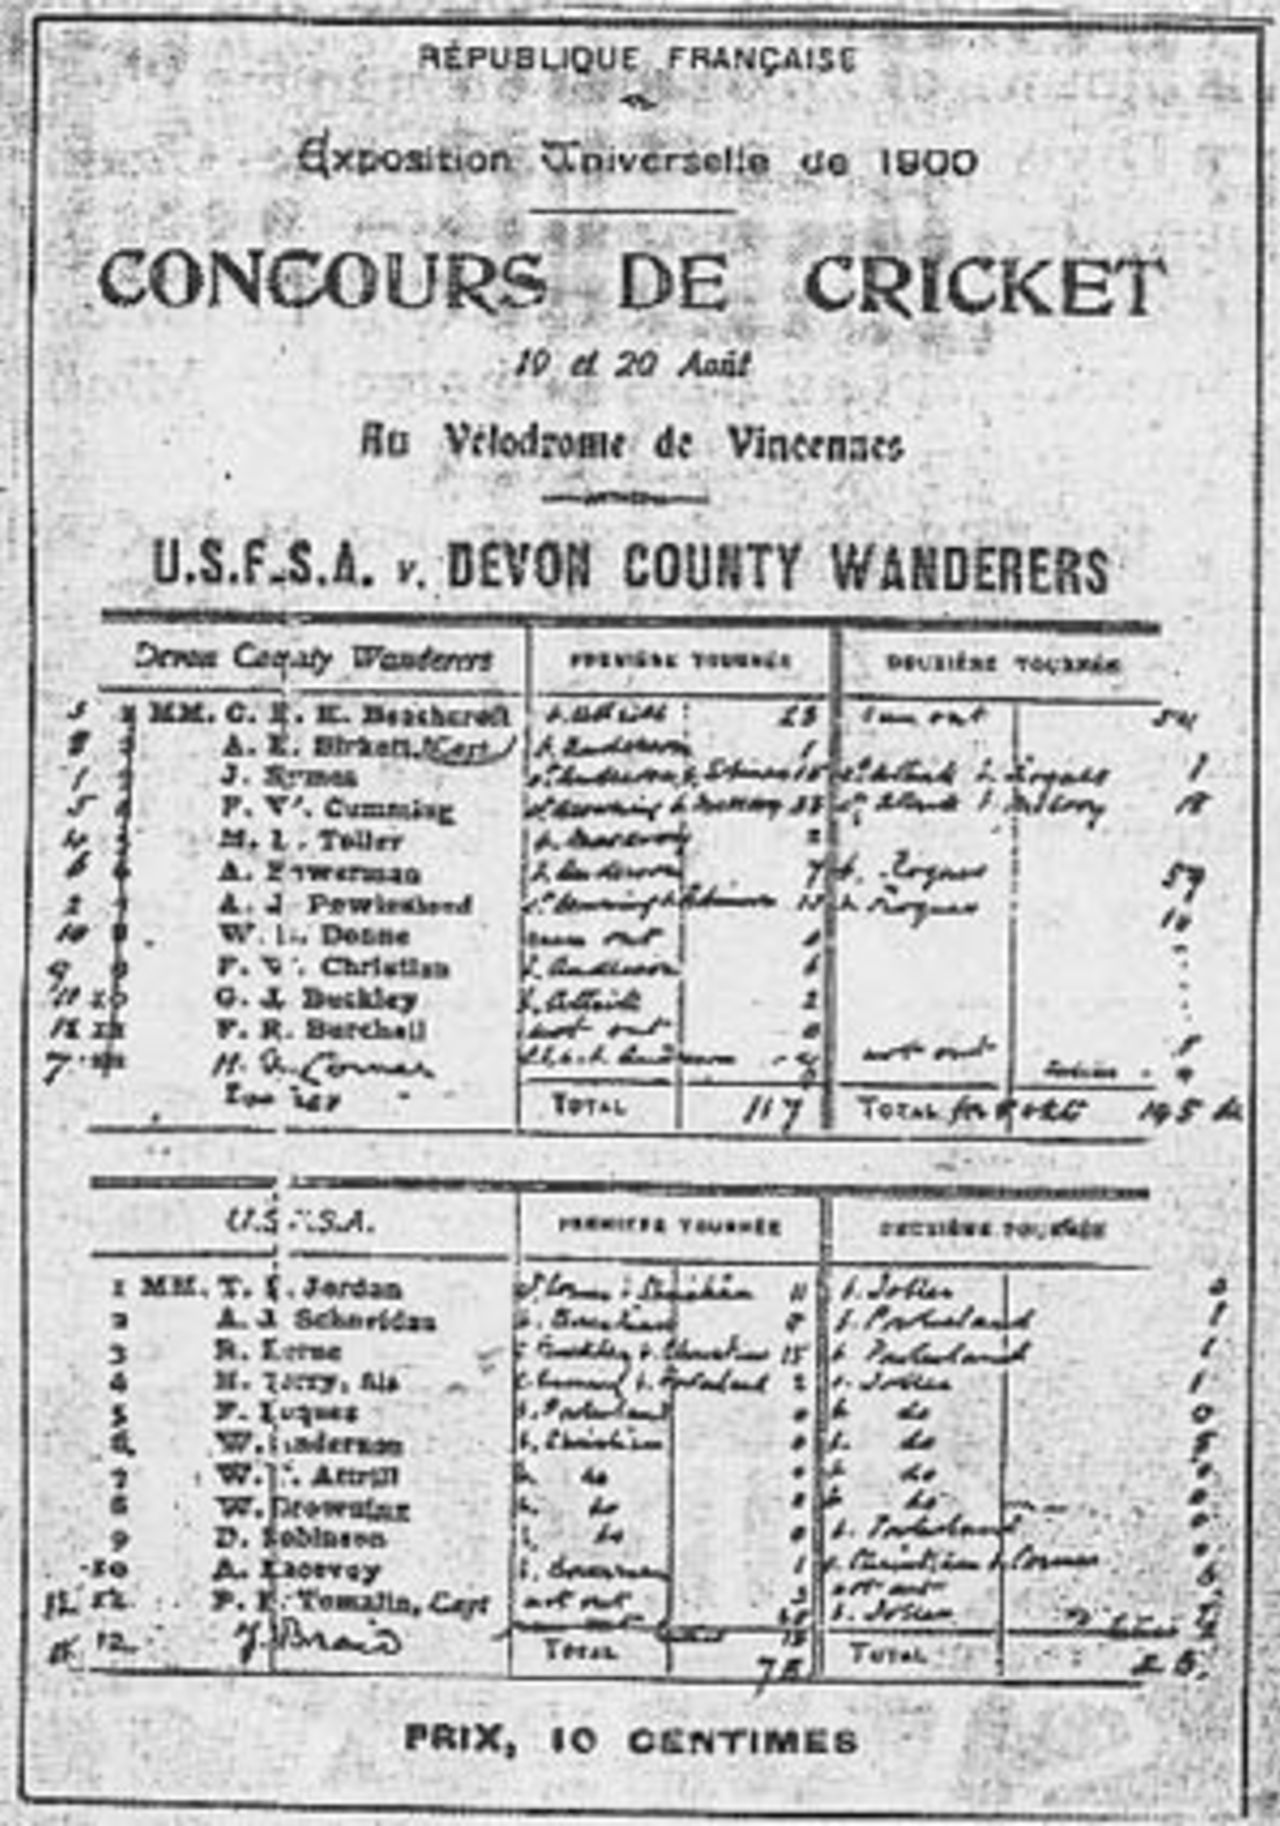 Scorecard from the 1900 Olympic cricket tournament.  The captains agreed to a 12-a-side game, and so the extra players had to be added by hand, August 20, 1900